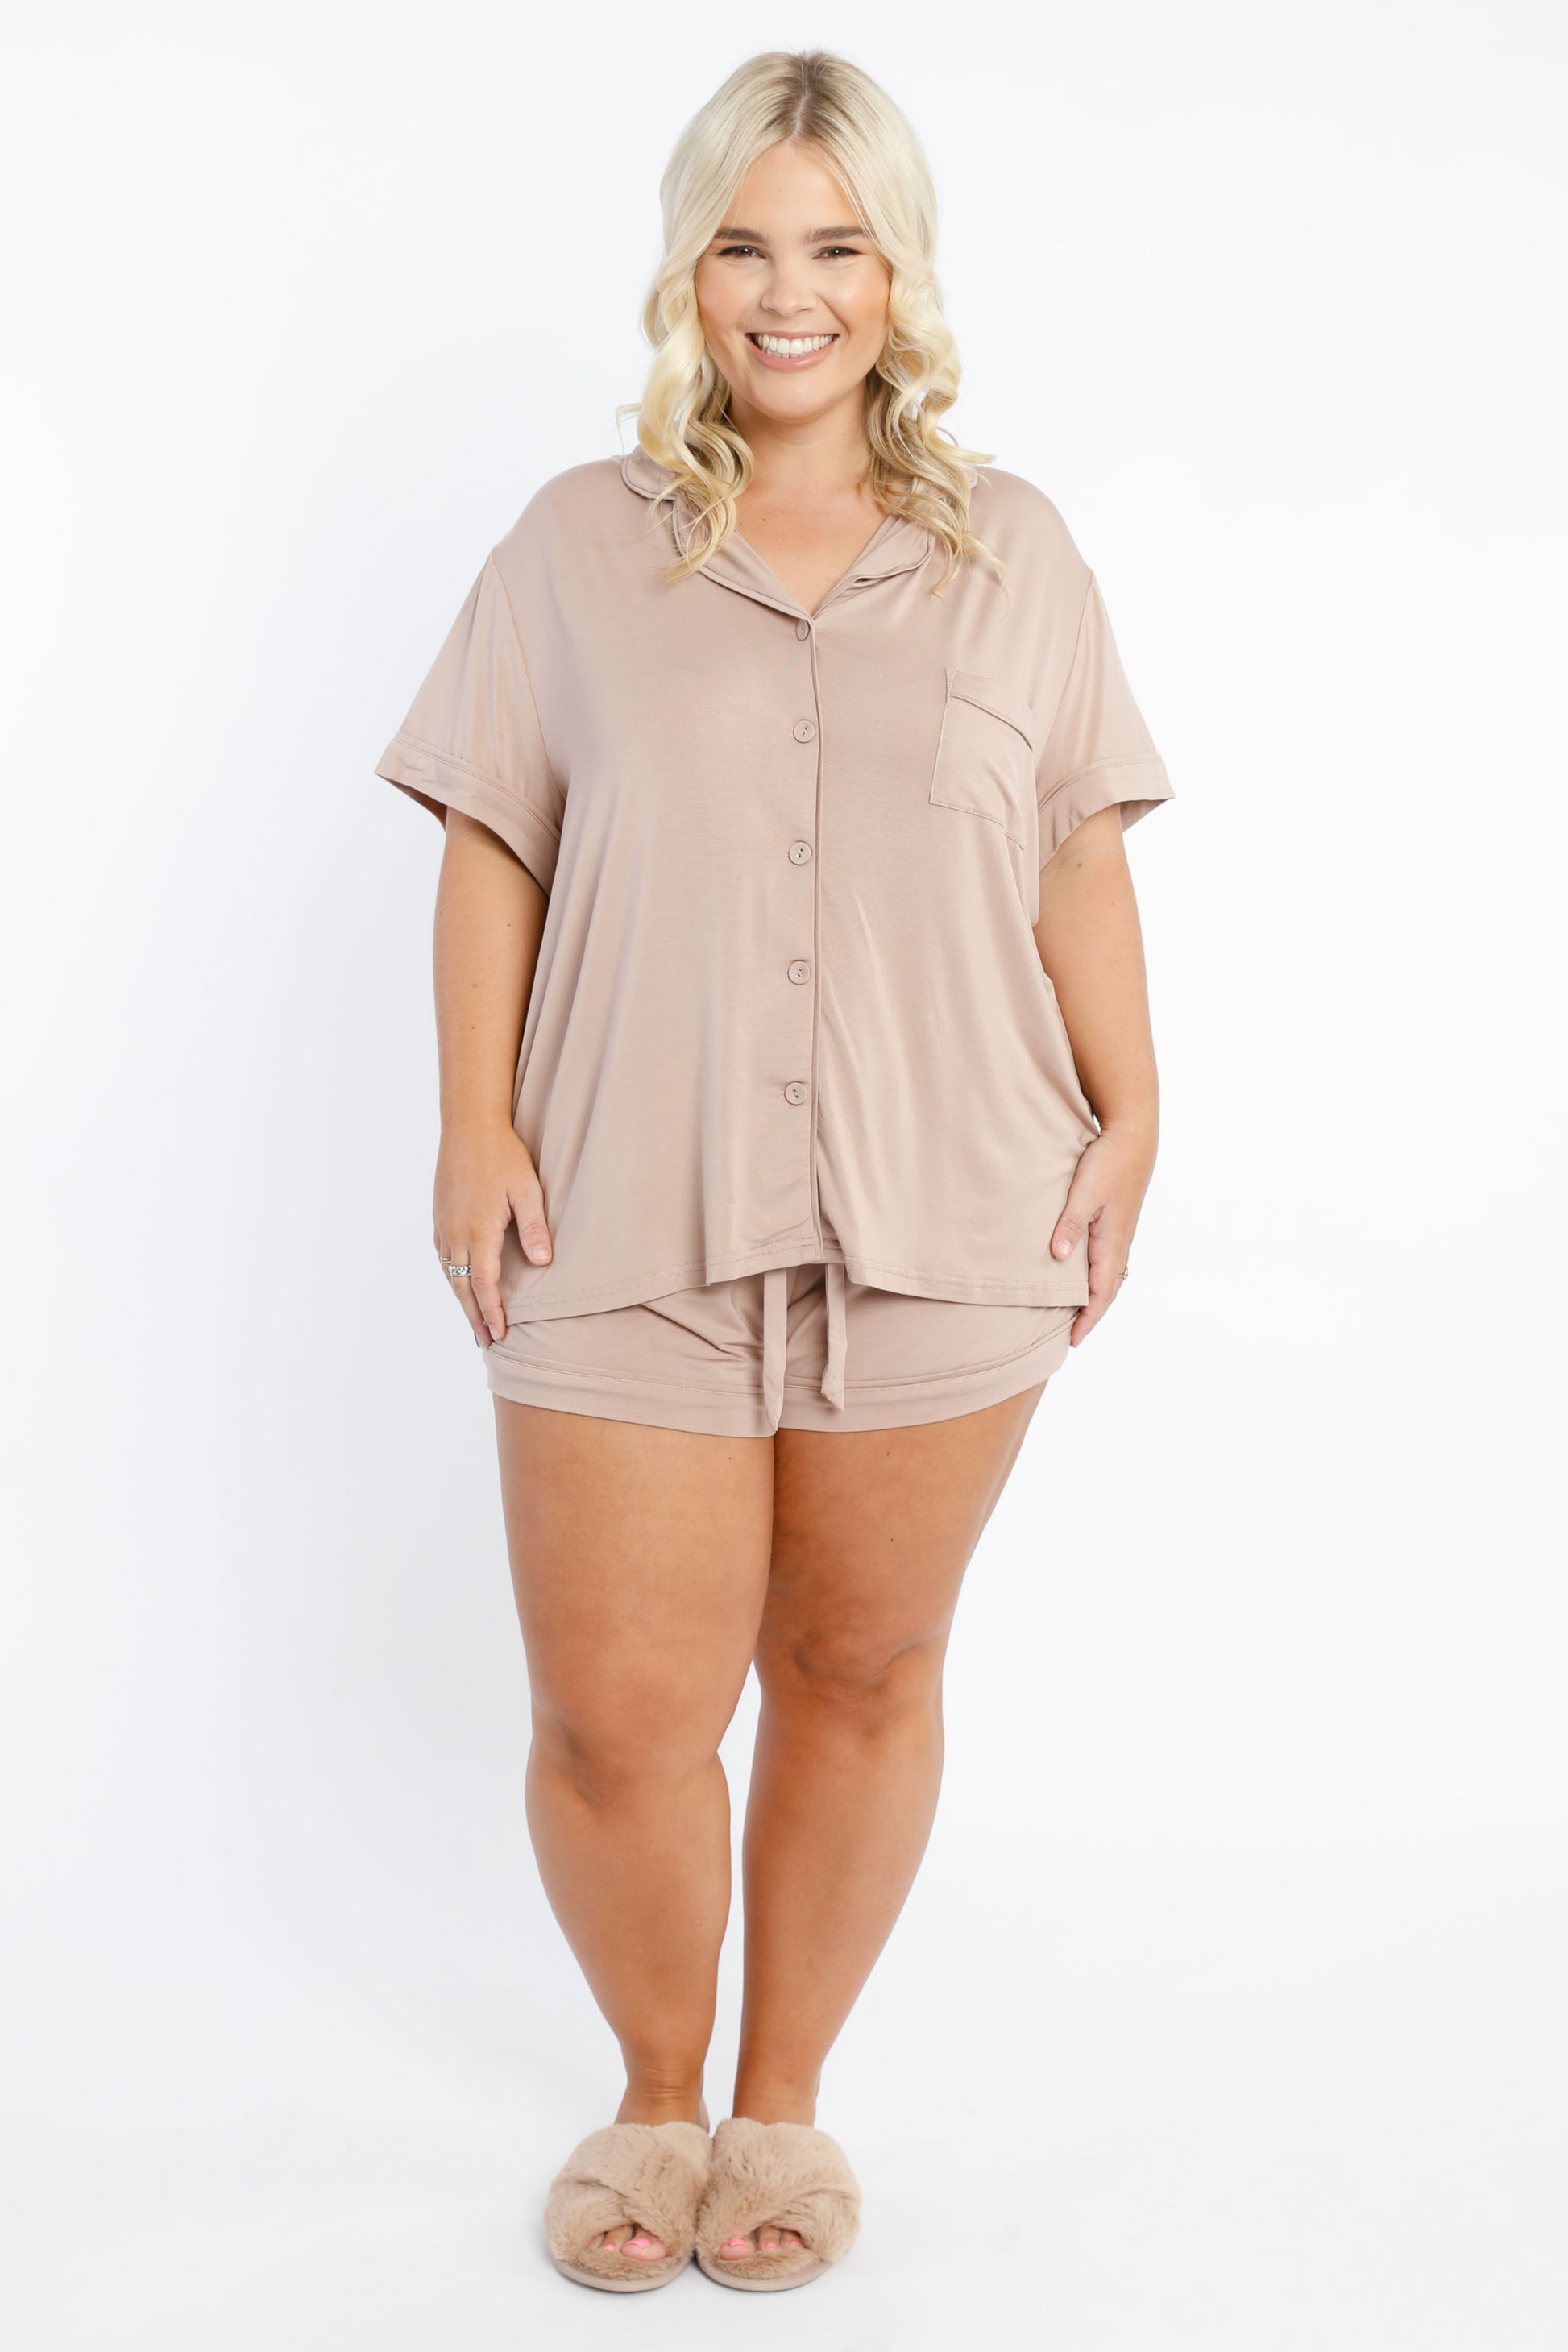 Ready for bed? Relax in style and slip into our short sleeve pyjama top in a lightweight, cooling Jersey fabric. Featuring short sleeves, collar, front pocket at left breast and classic buttons centre front. It is a relaxed style warm nights cool and comfortable feel. Pair with the PJ shorts for the perfect sleep set.